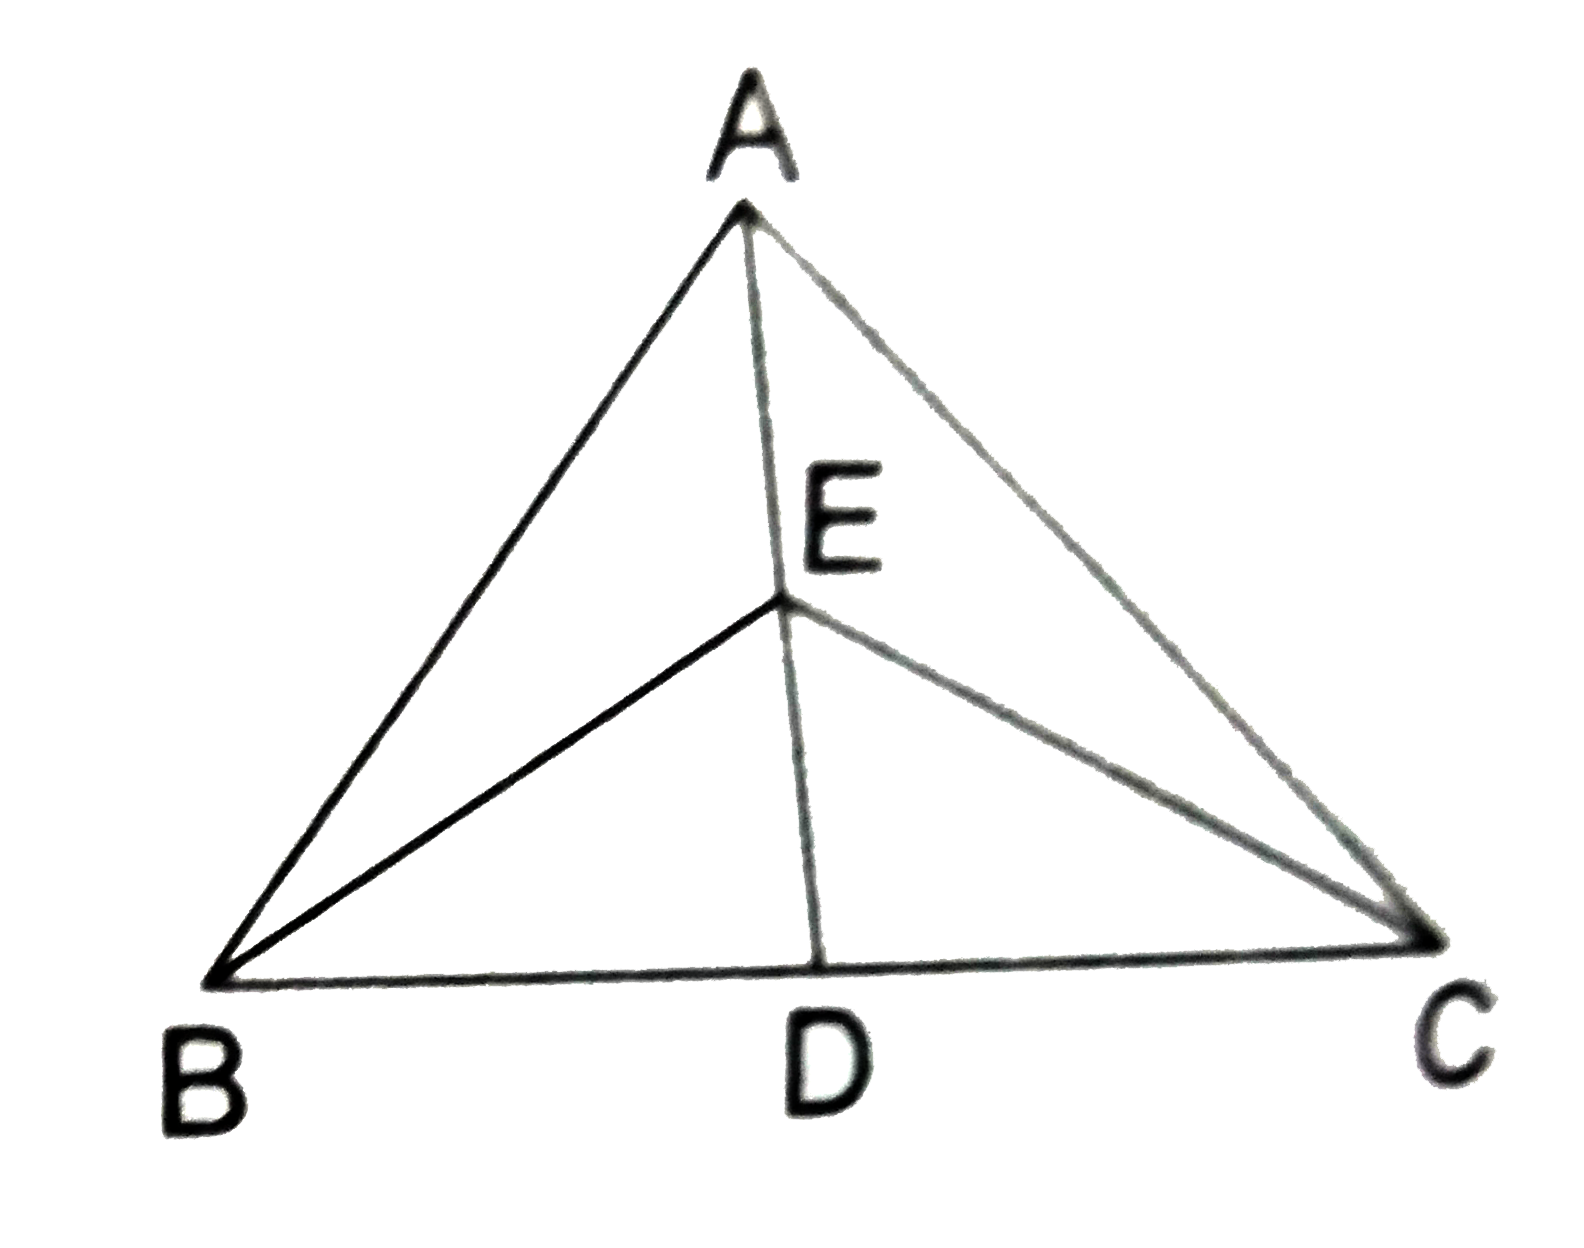 The vertex A of triangle ABC is joined to a point D on the side BC. The midpoint of AD is E.   Prove that ar(triangleBEC)=(1)/(2)ar(triangleABC).